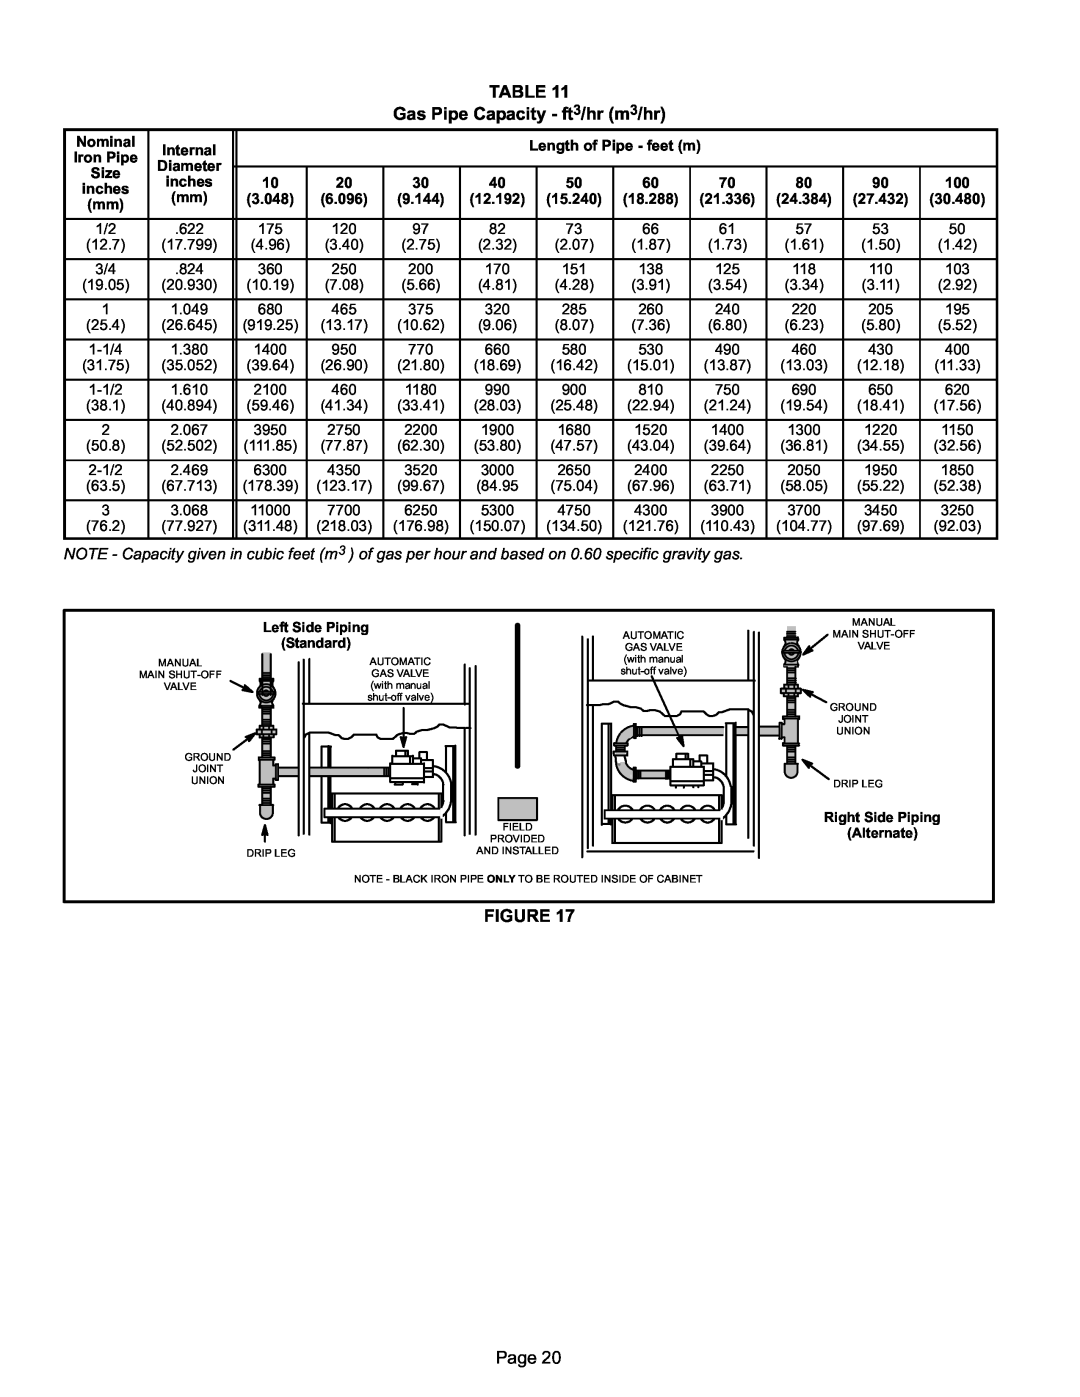 Lennox International Inc SL280DFV installation instructions TABLE Gas Pipe Capacity − ft3/hr m3/hr, Page 